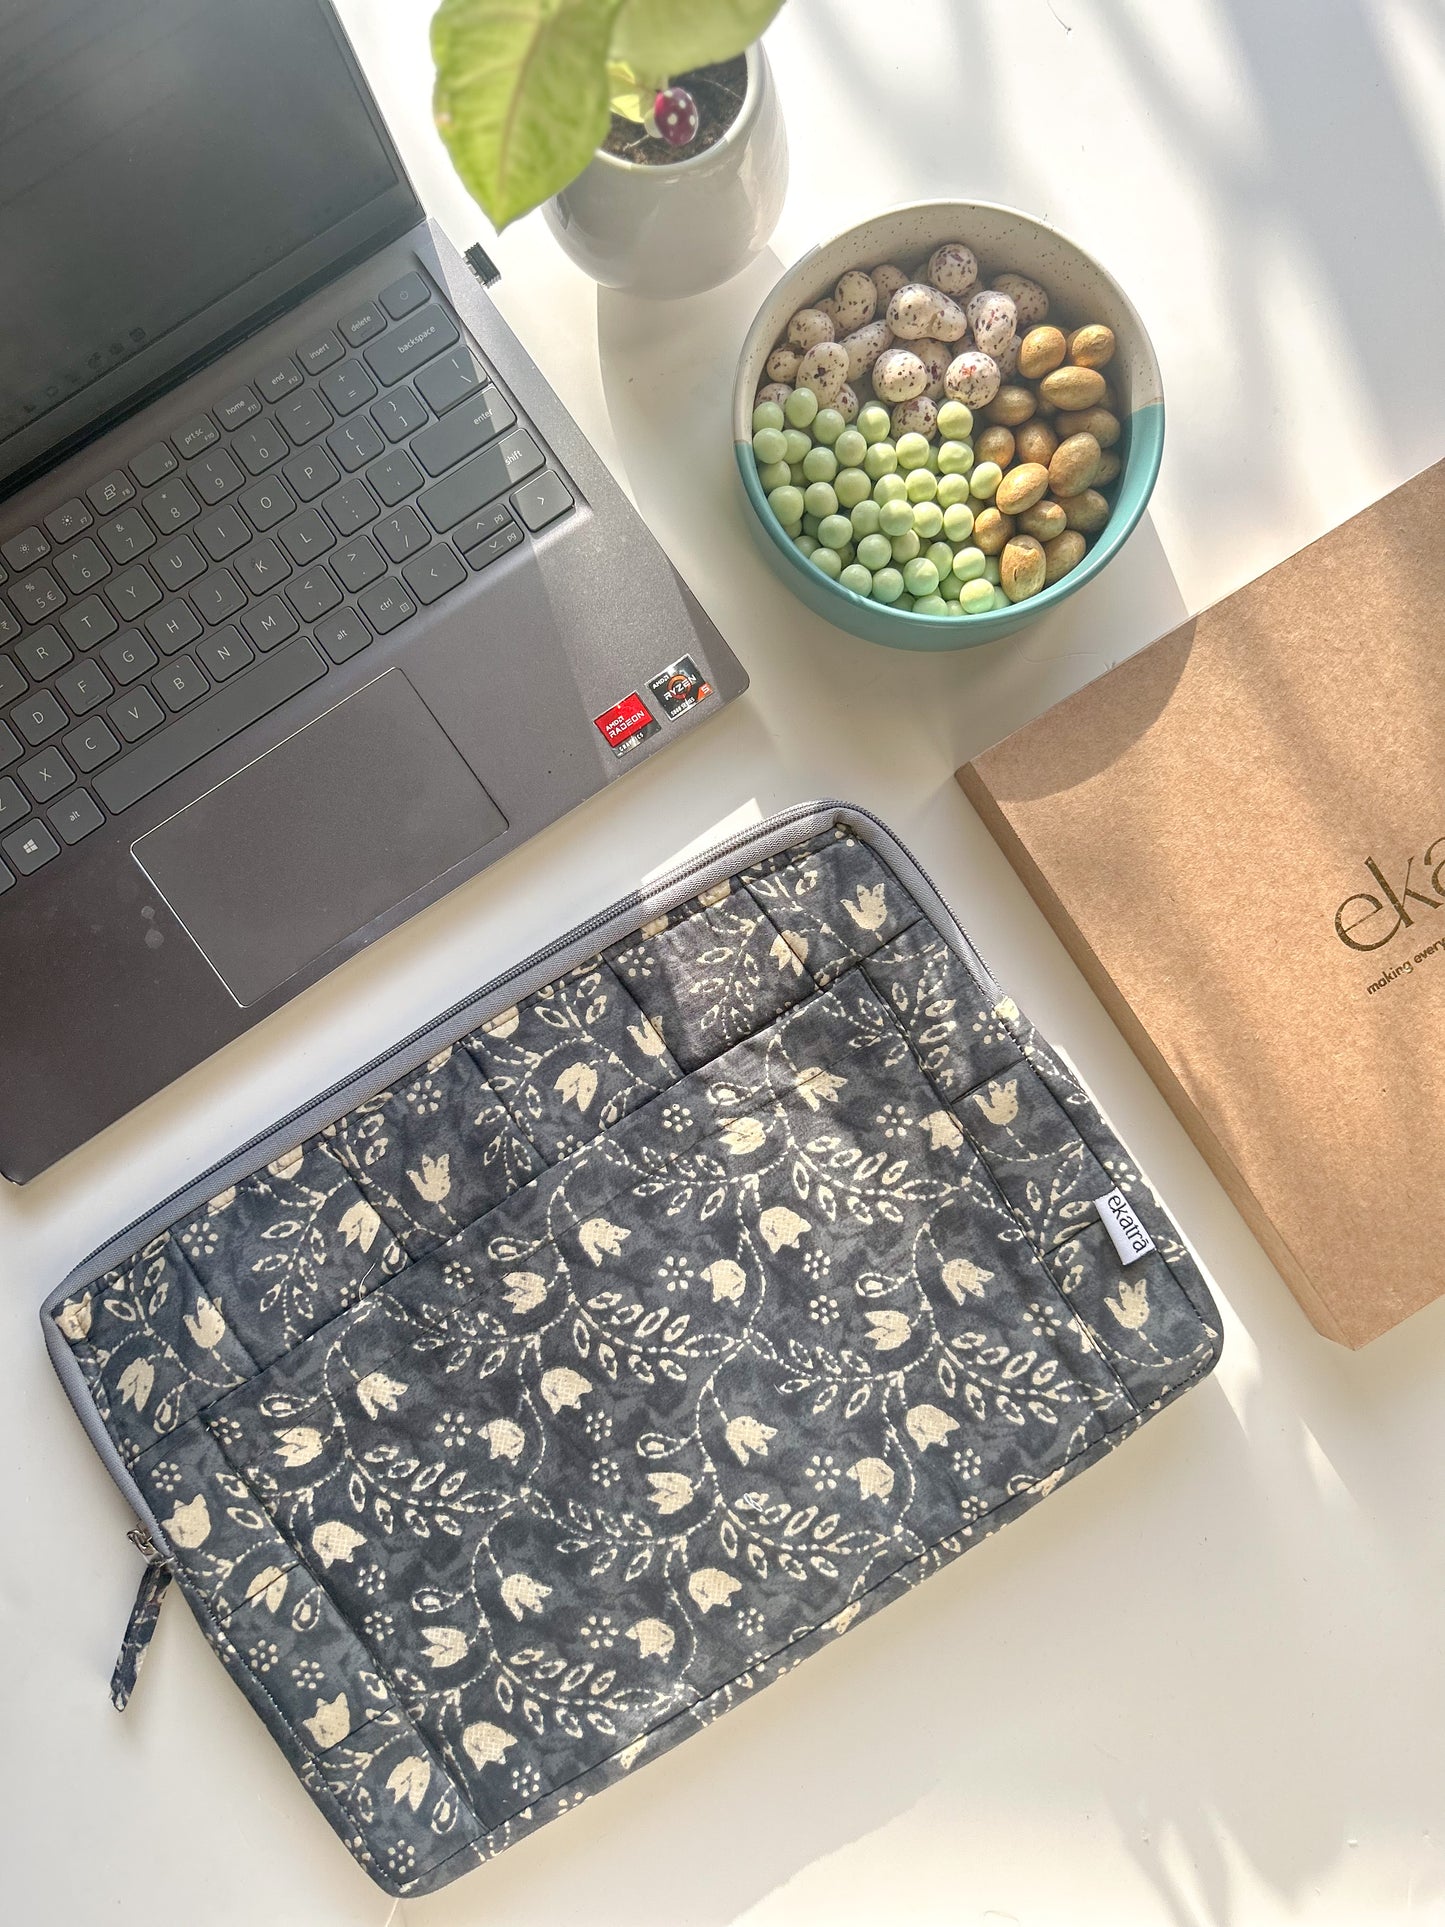 Sustainable Handmade Cotton Laptop Sleeve/Laptop Cover by Ekatra - Black Floral